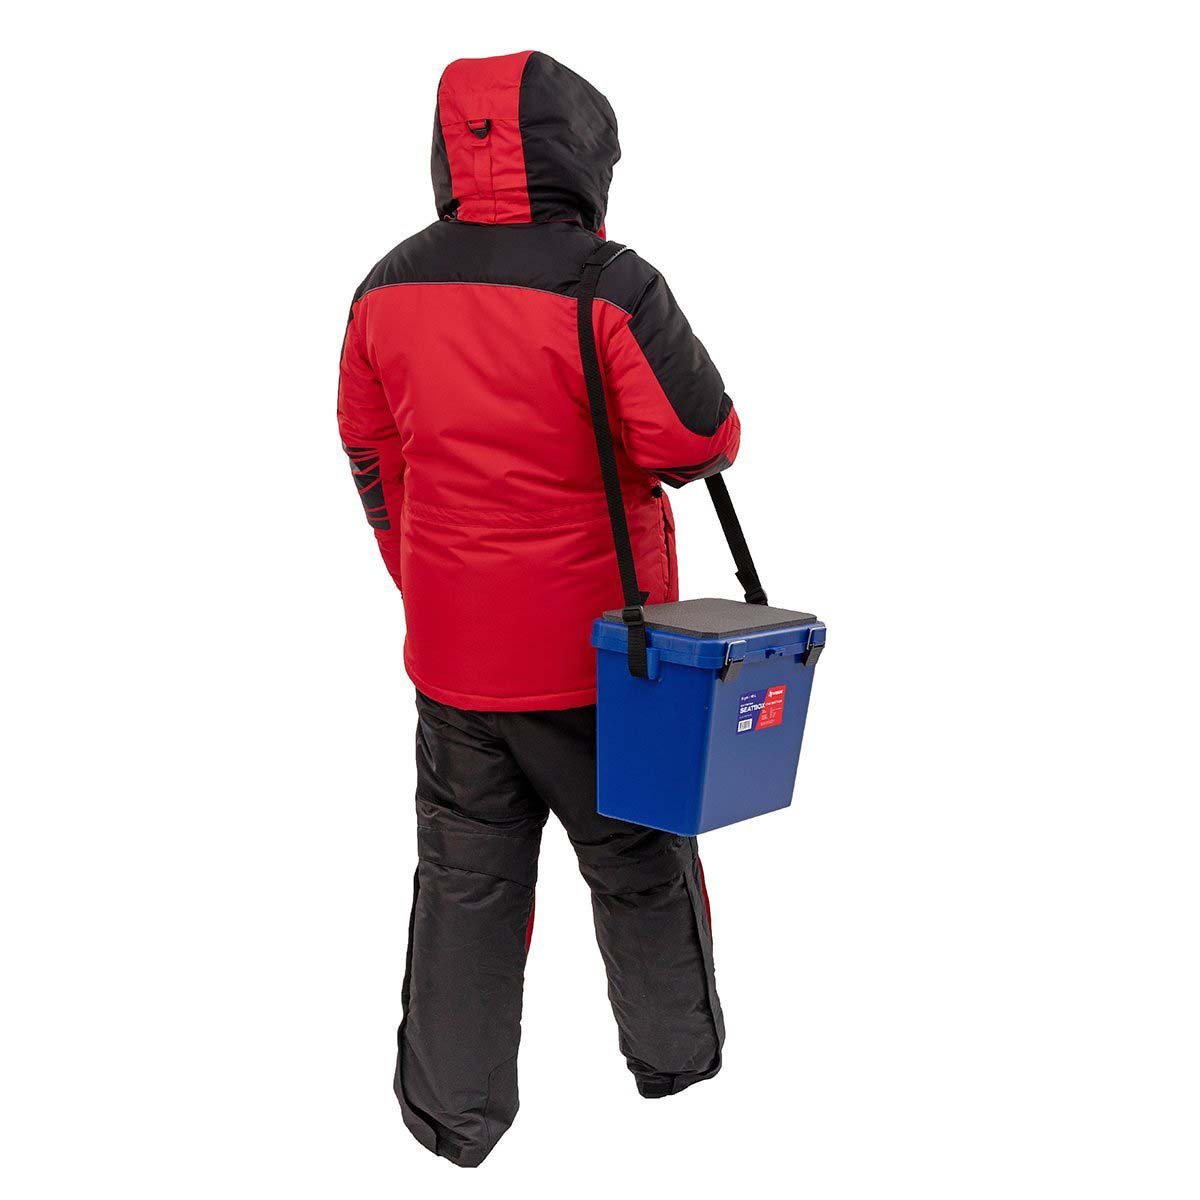 An angler carrying the Ice Fishing Bucket Type Box with Seat and Adjustable Shoulder Strap | 1 compartment | 5 gal | blue color